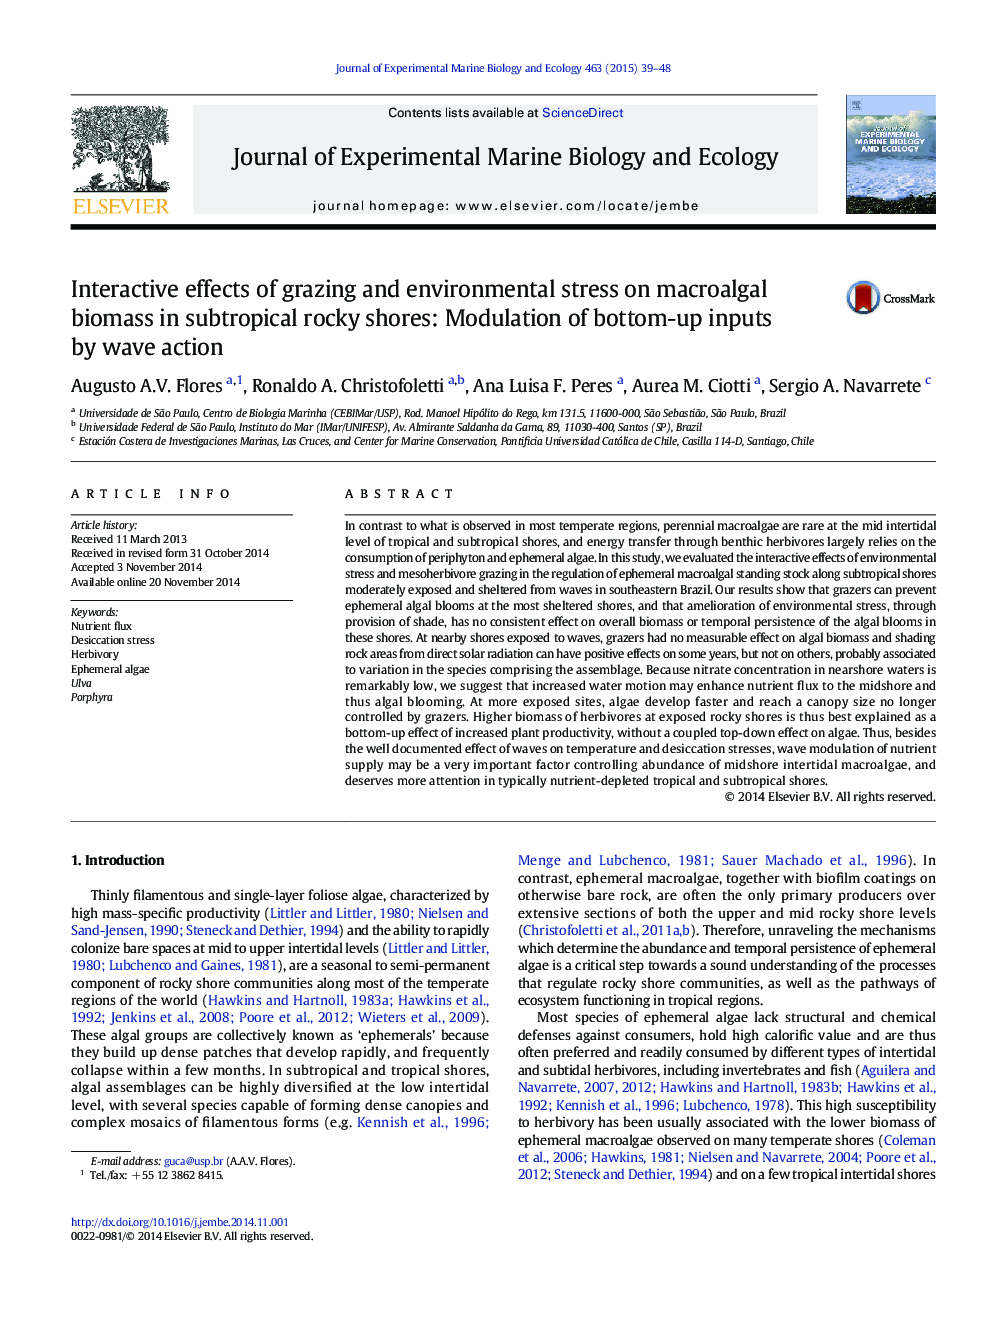 Interactive effects of grazing and environmental stress on macroalgal biomass in subtropical rocky shores: Modulation of bottom-up inputs by wave action